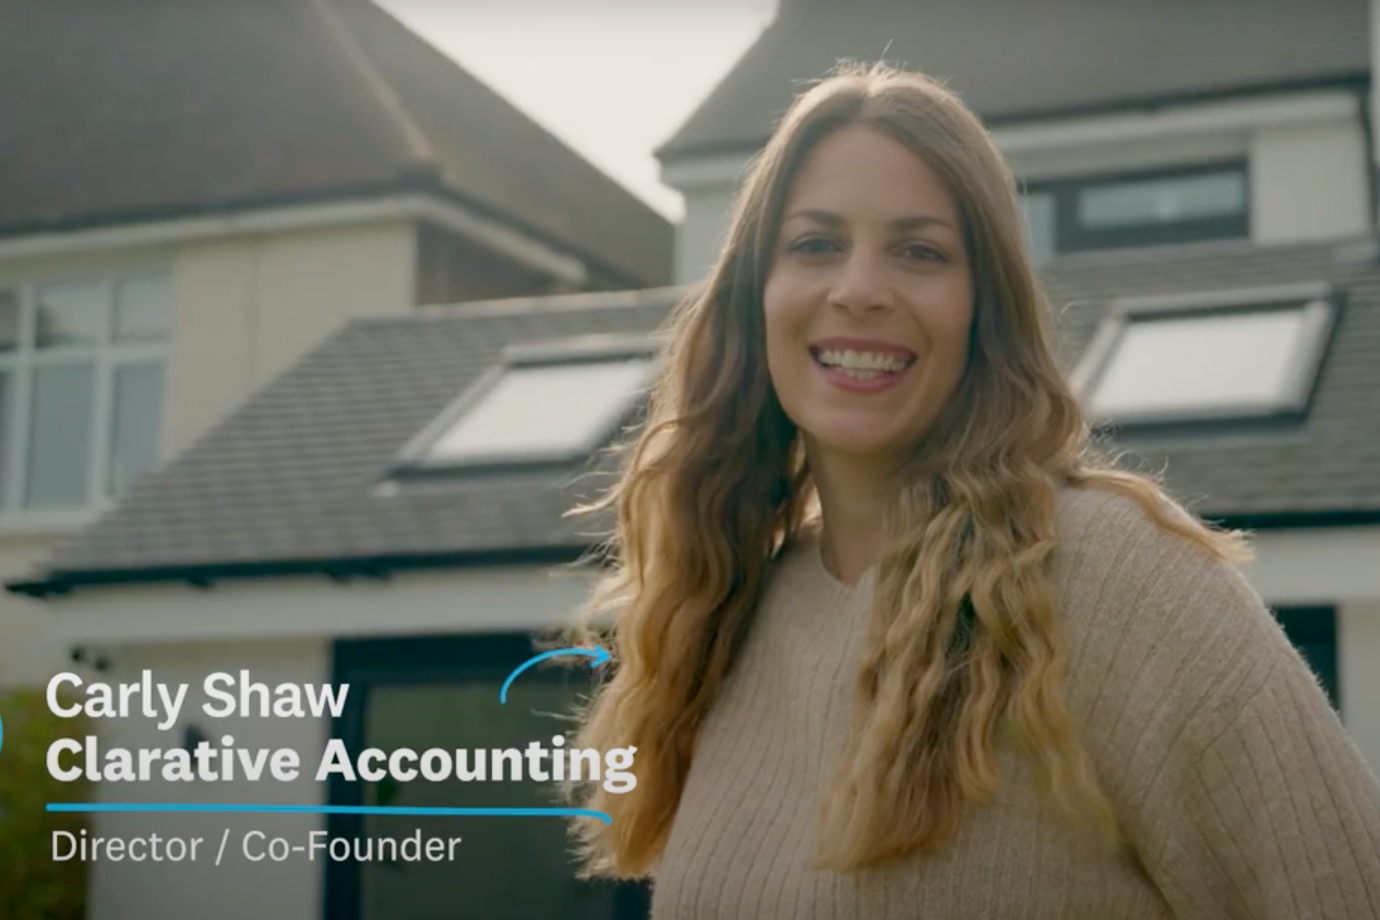 Carly Shaw, director and co-founder of Clarative Accounting